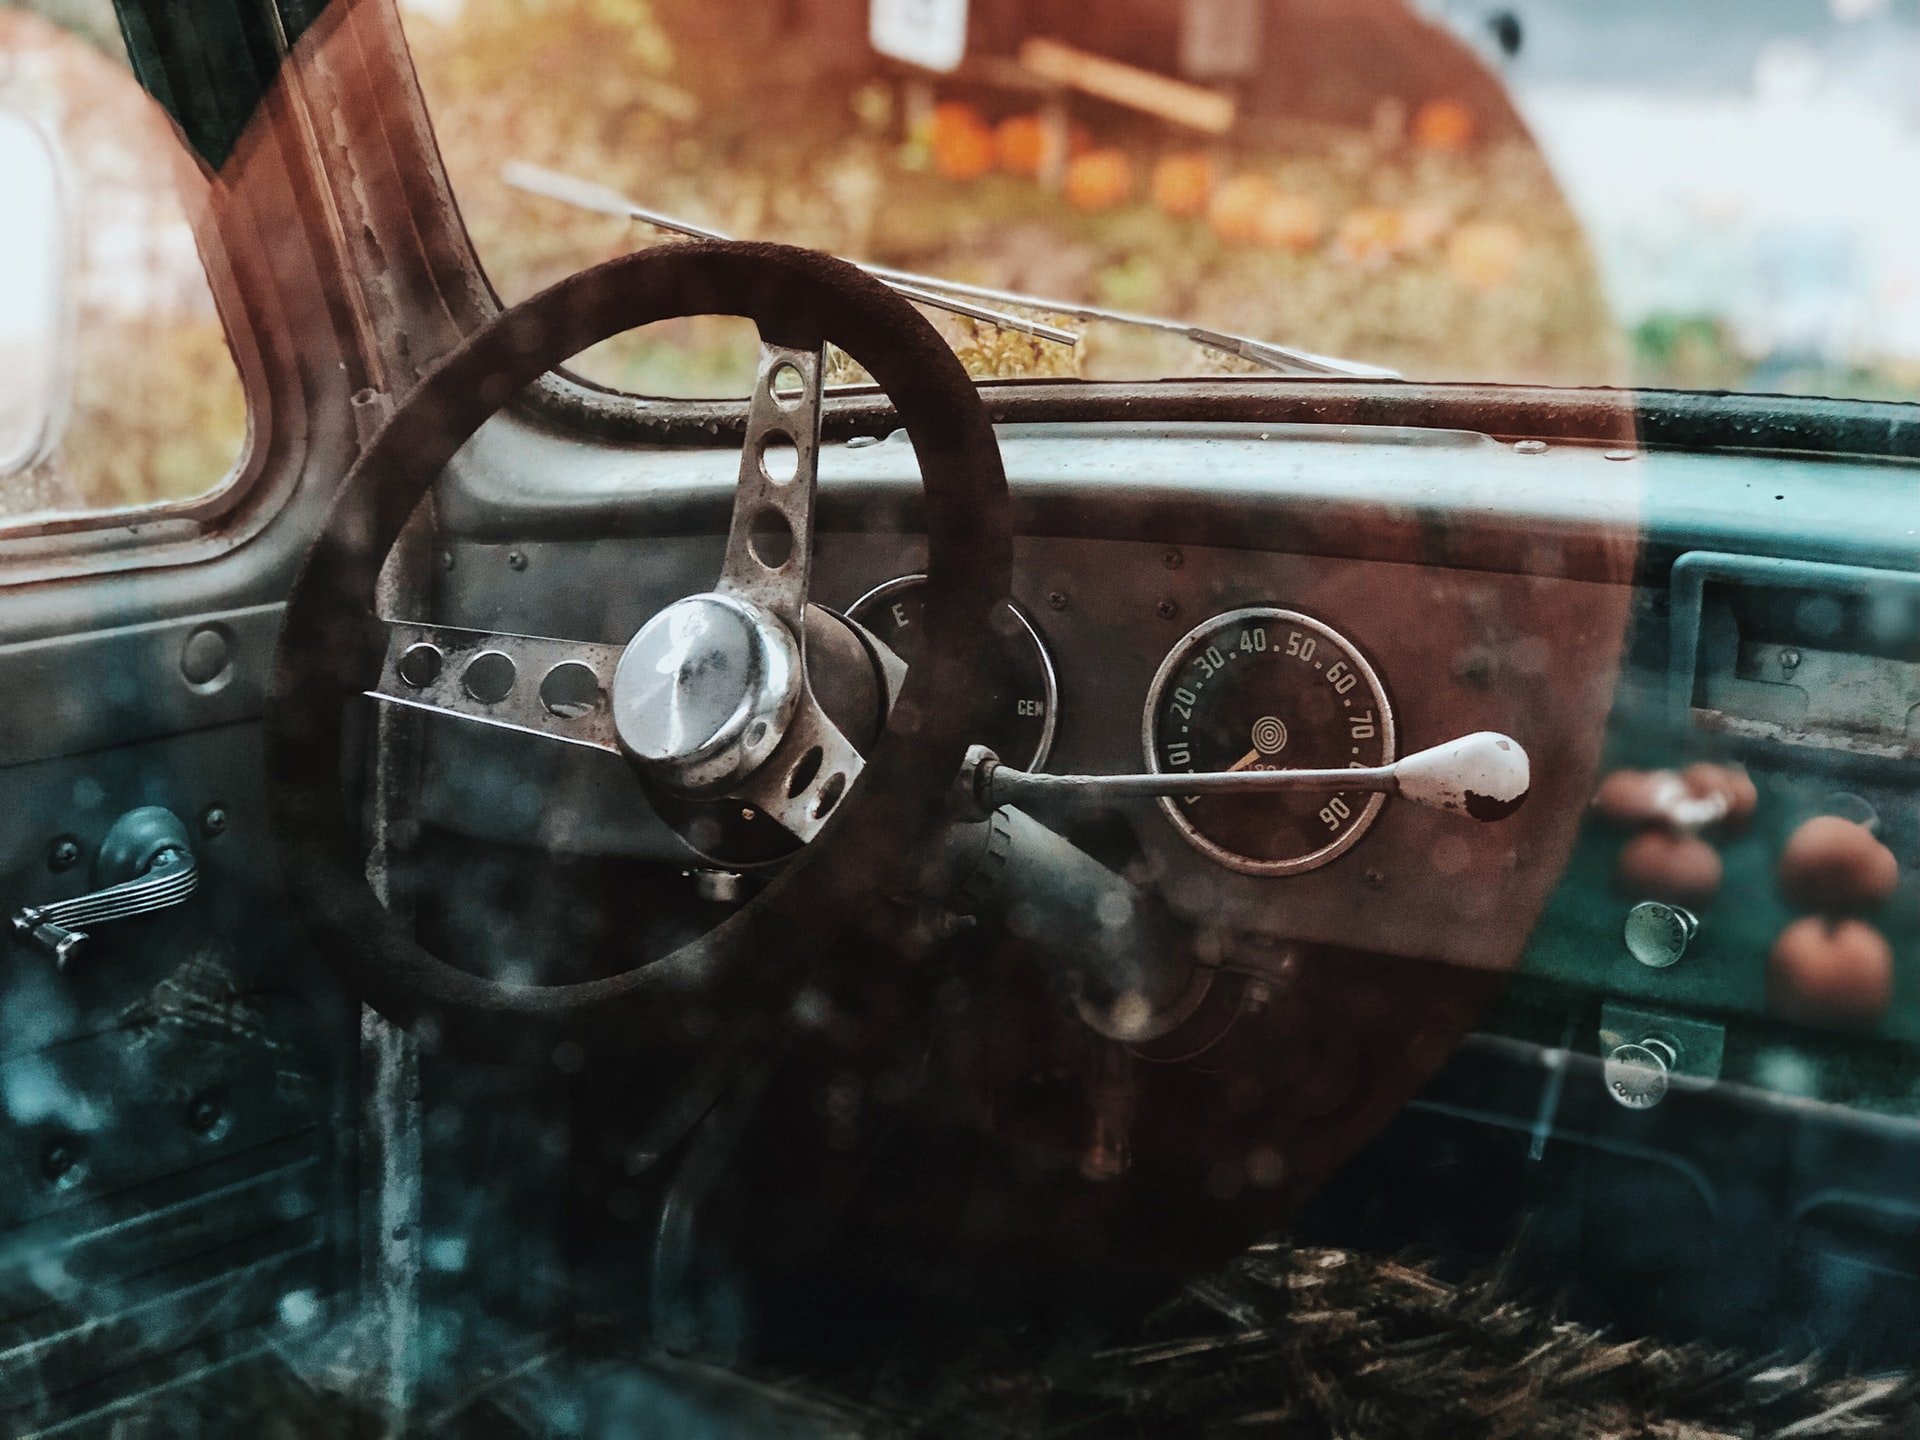 It was time to change the truck's oil. | Source: Unsplash